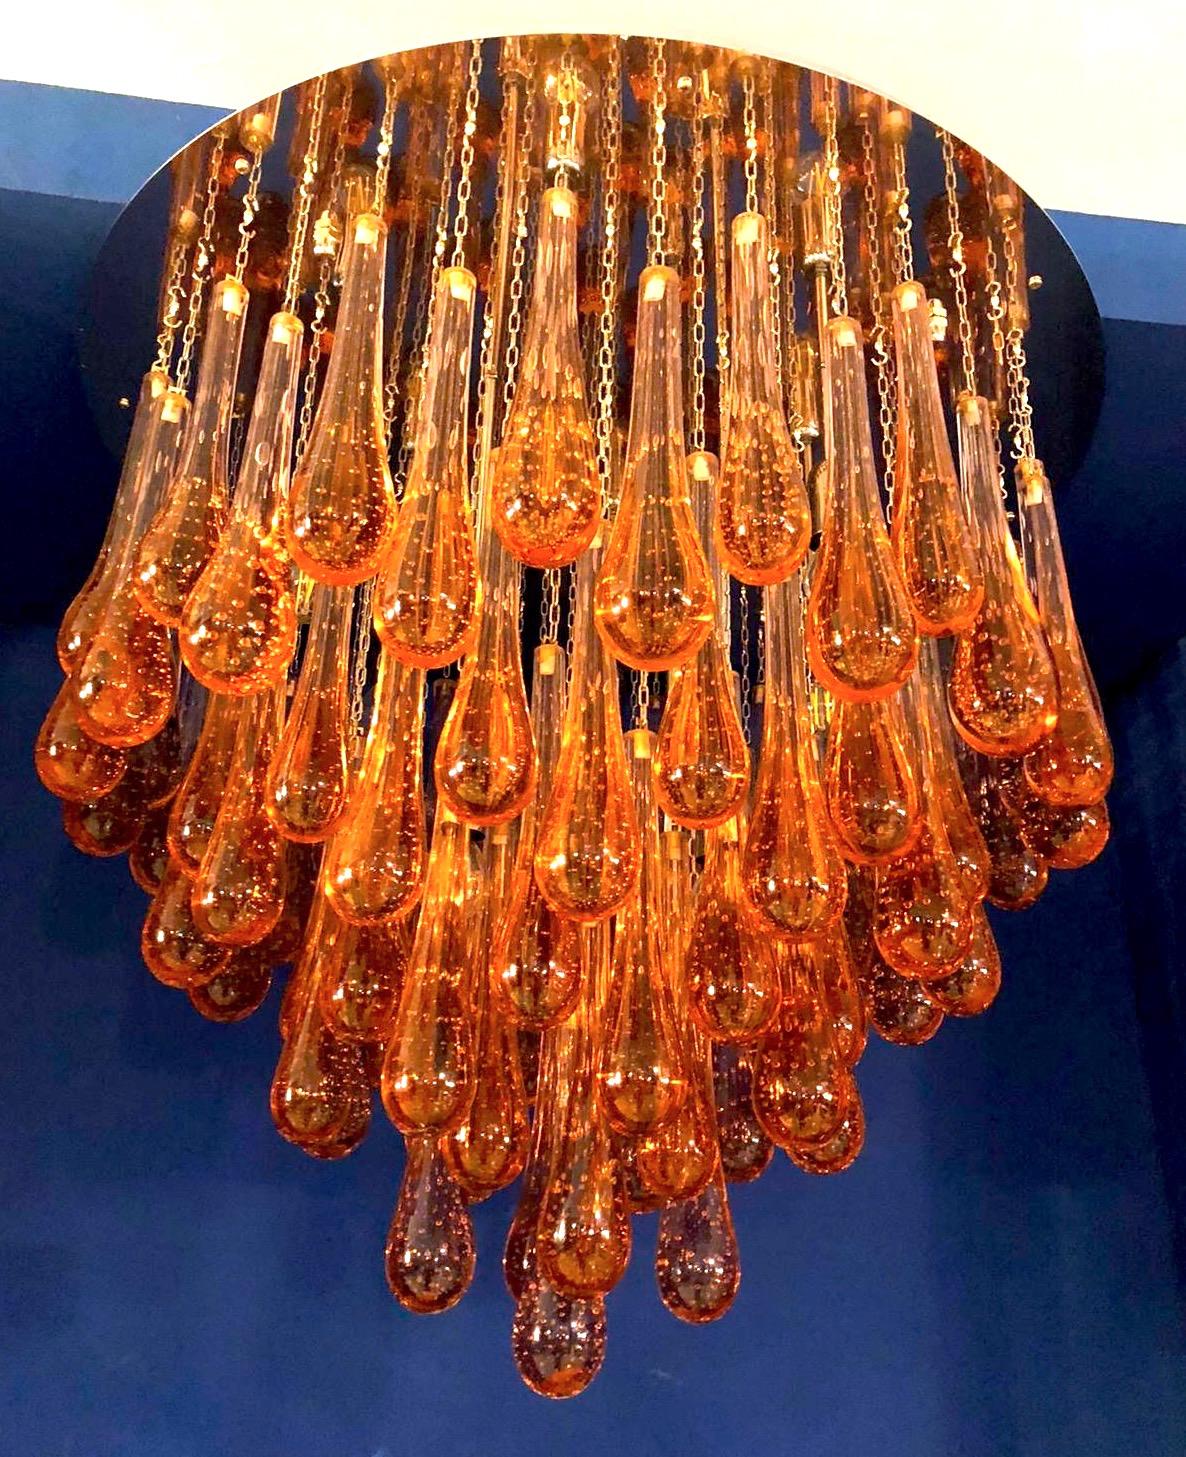 Gold drop modern Murano glass chandelier on brass frame.
Four E 14 light bulbs wired for US standards.
Variations available, size finishes, glass color.